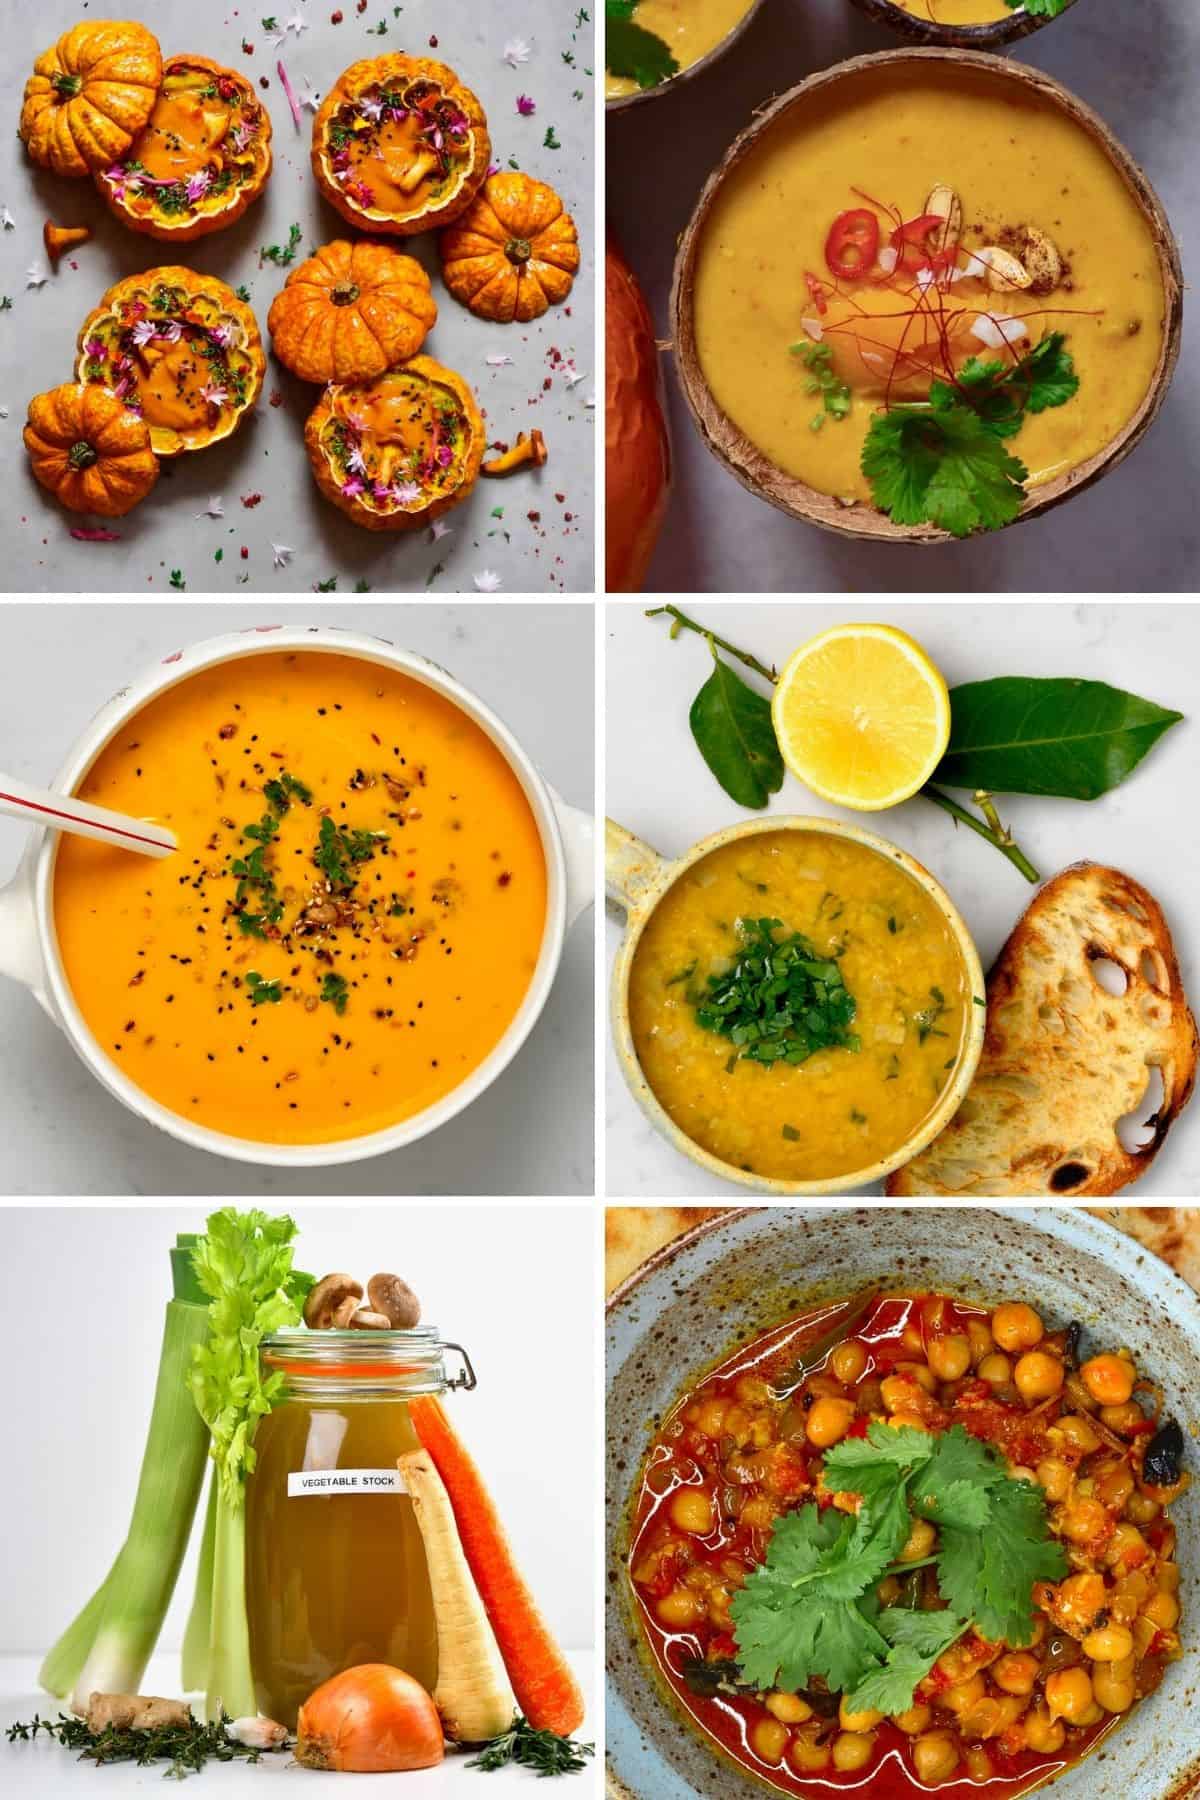 Soup and stew recipes with turmeric